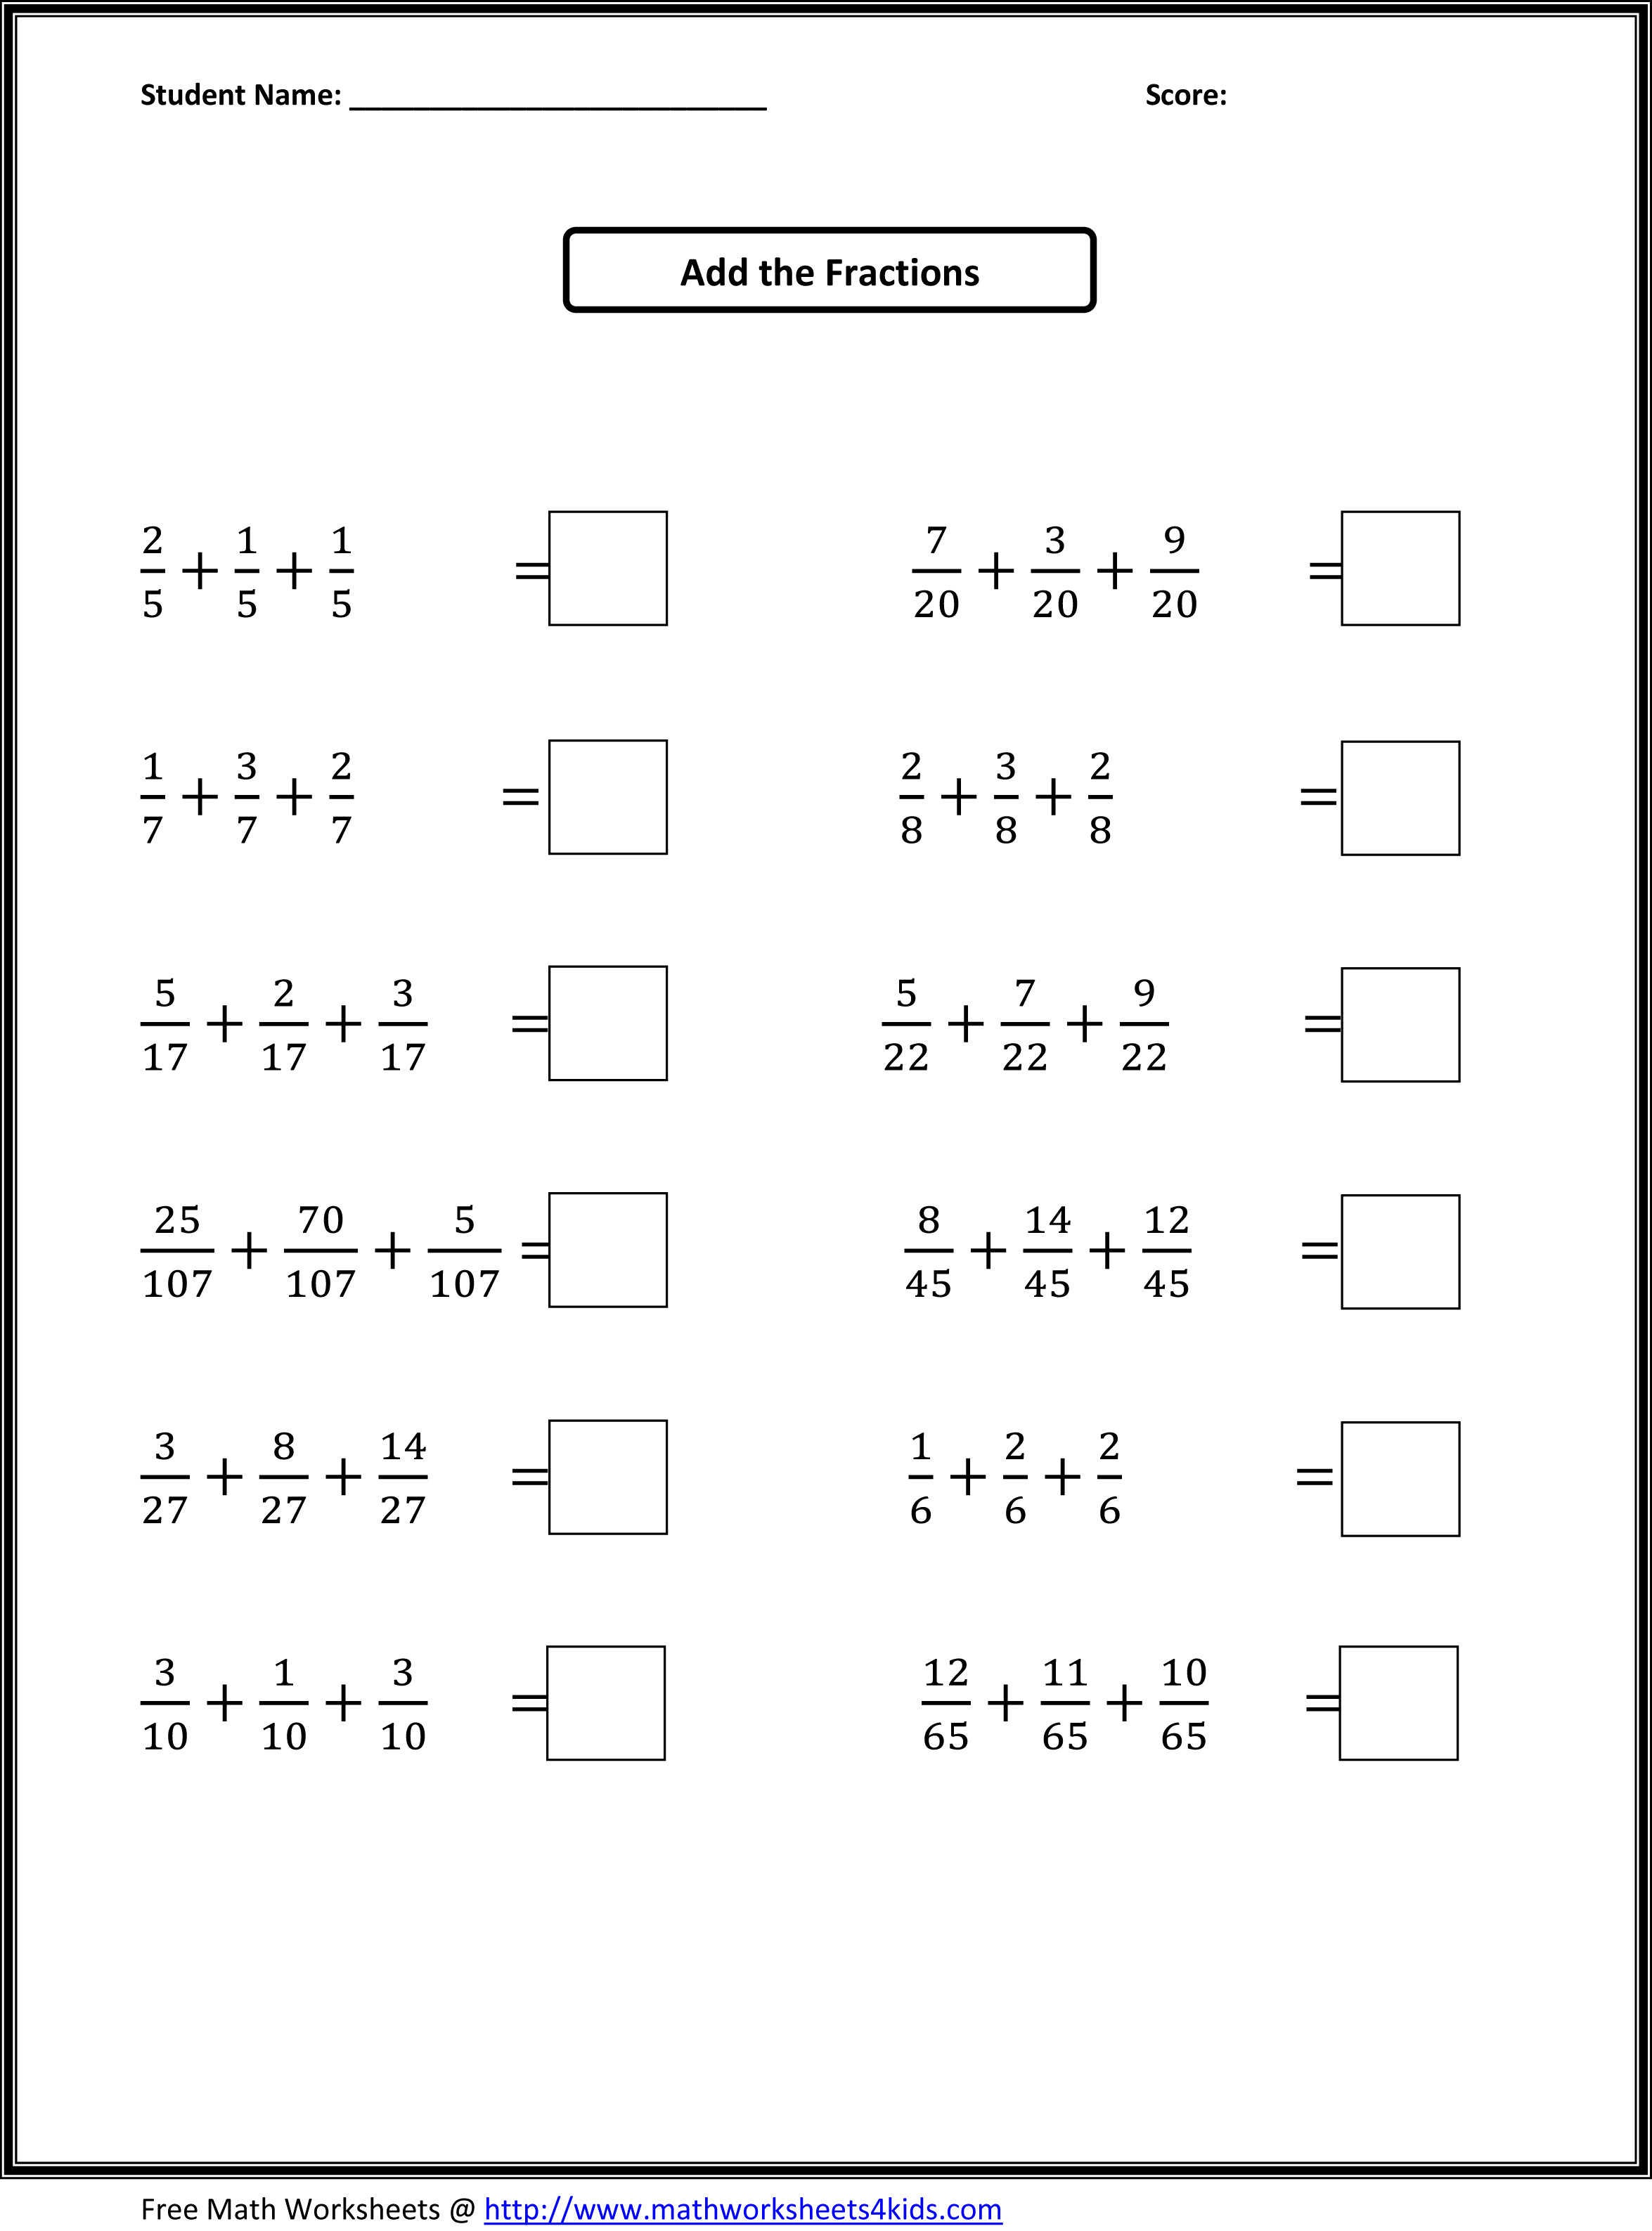 Ordering Fractions Worksheet 4th Grade 4th Grade Fractions Lessons Tes Teach